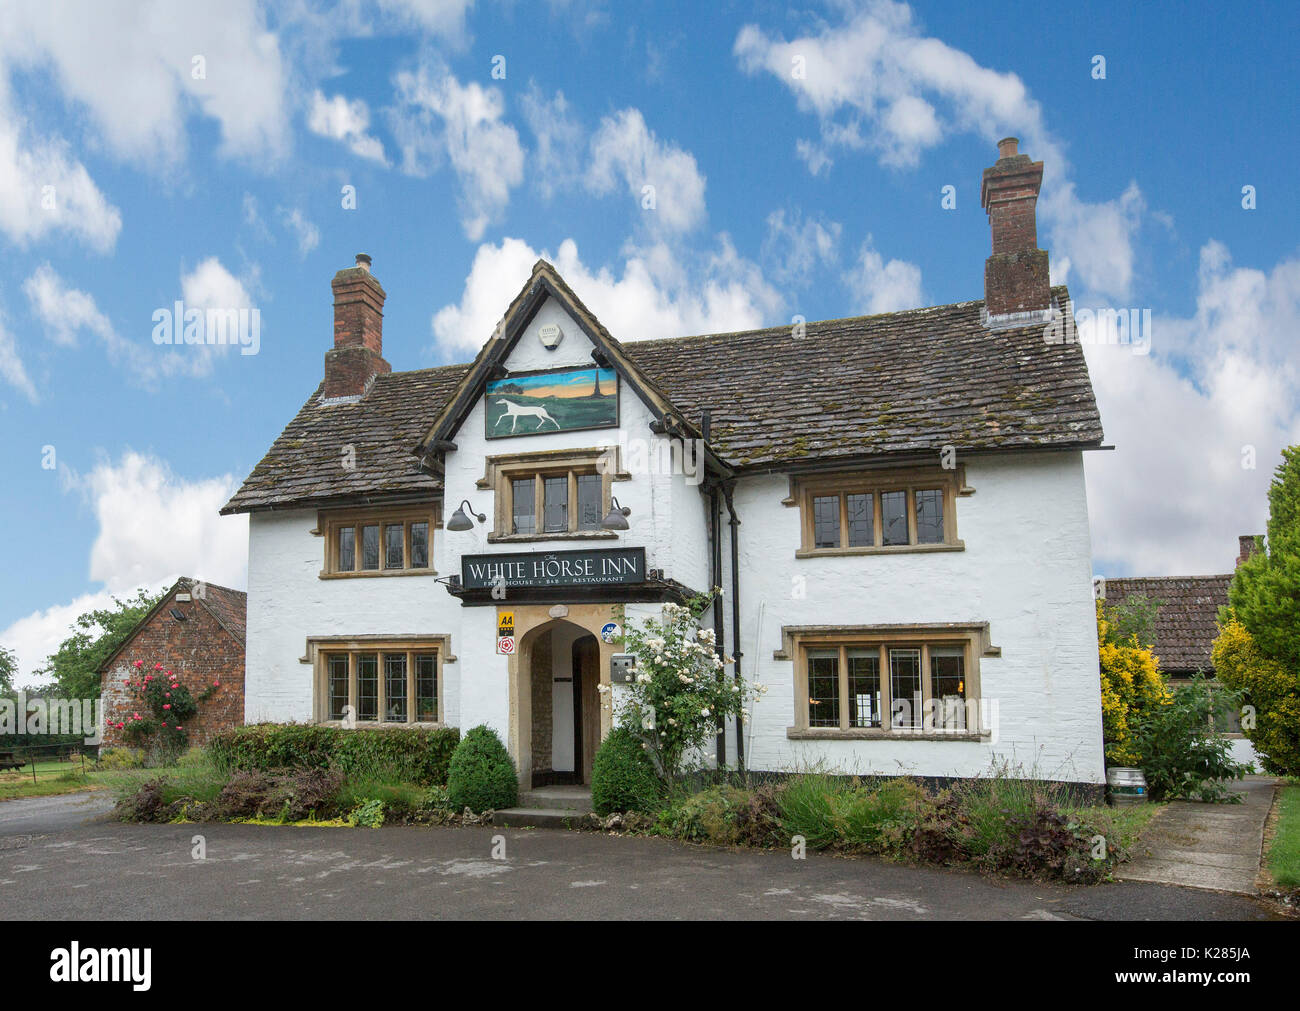 The White Horse Inn, 18th century free house pub and B & B at Compton Bassett, Wiltshire, England Stock Photo